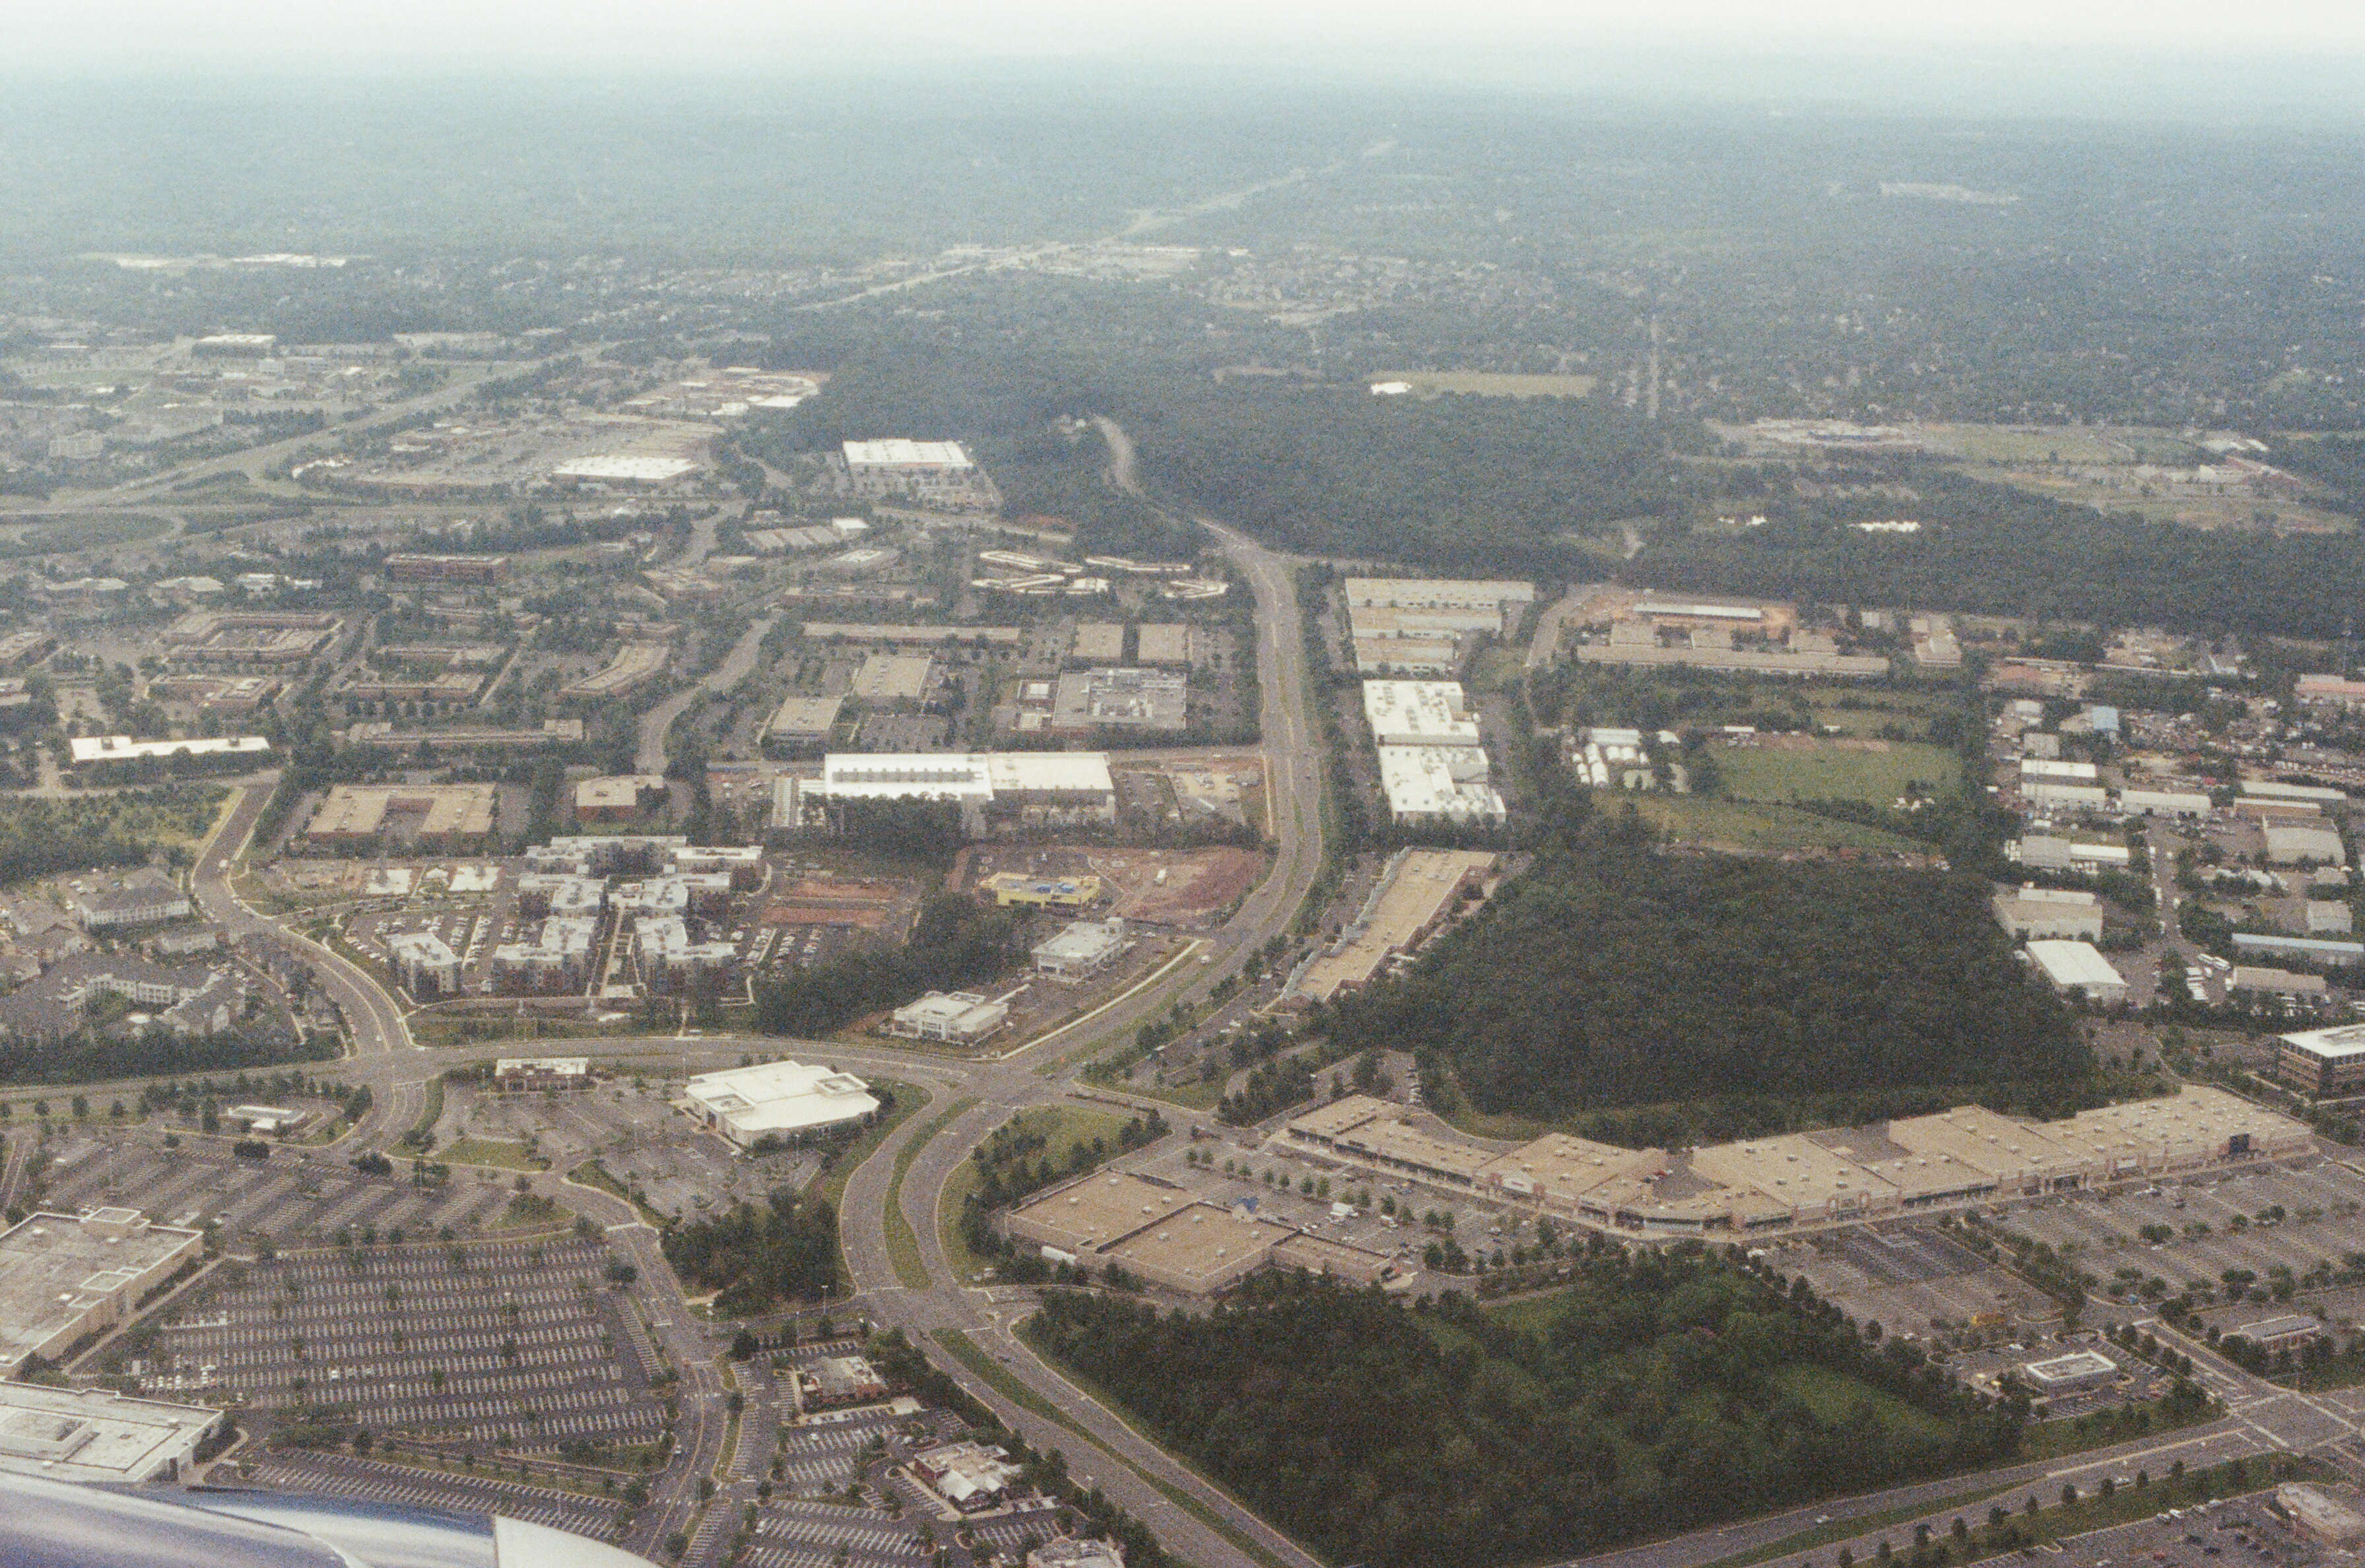 ✈
 - Above Dulles International Airport